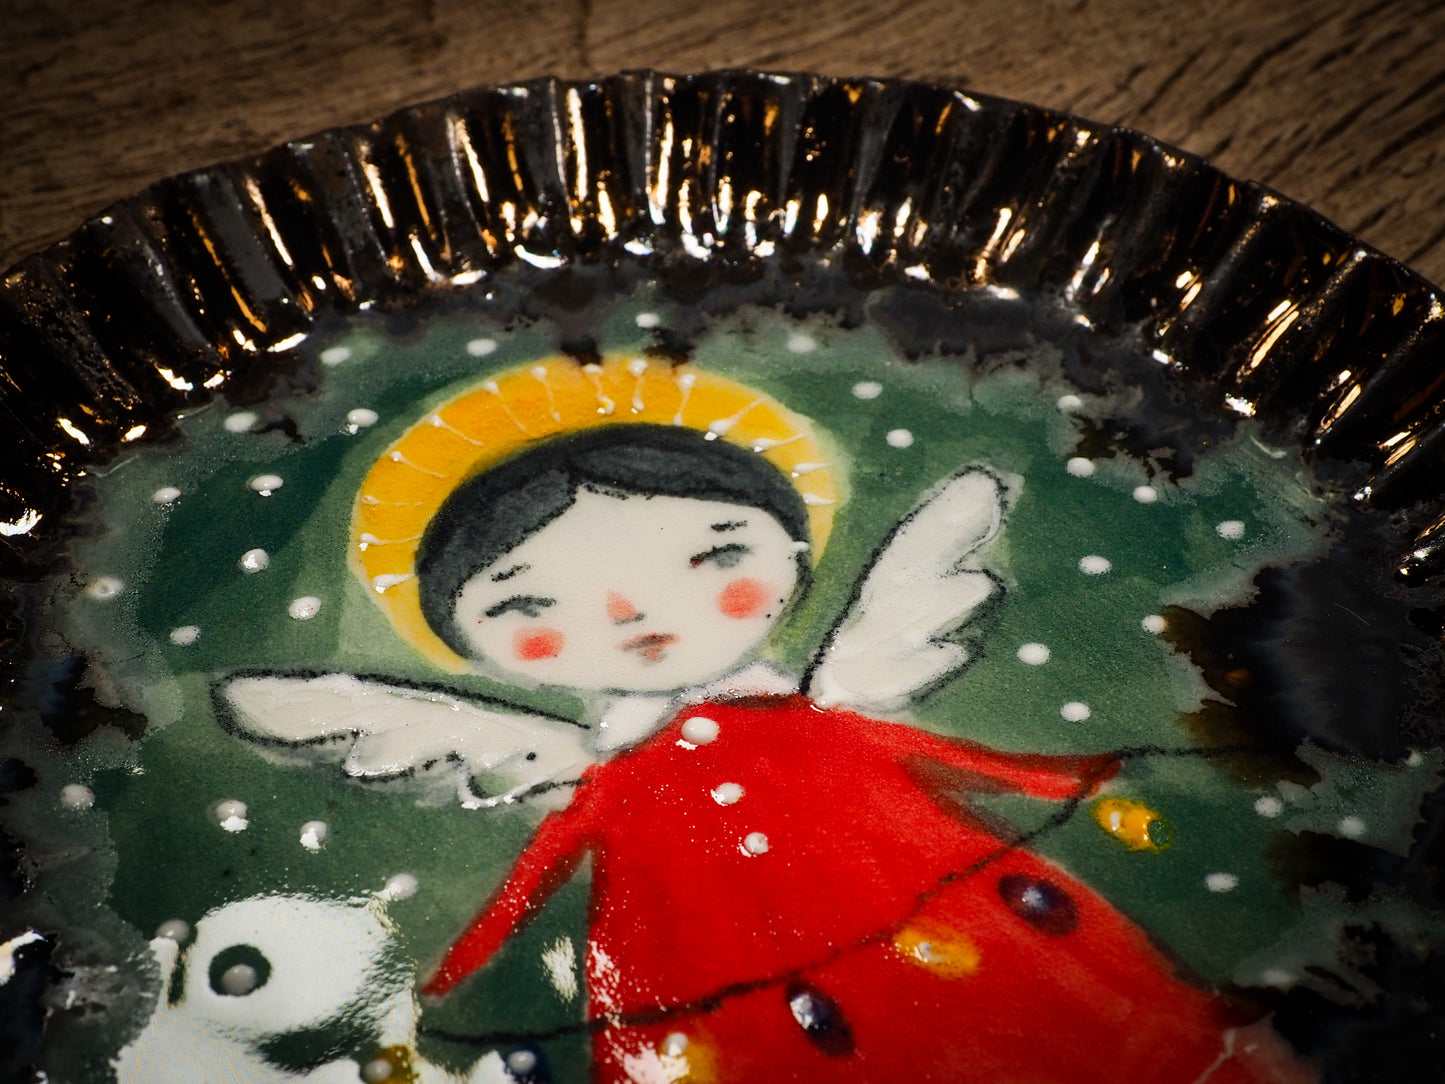 An original Christmas Holiday cake dinner dessert plate round glazed ceramic dinnerware handmade by Idania Salcido, the artist behind Danita Art. Glazed carved sgraffito stoneware, hand painted and decorated, it is illustrated by hand with snowmen, Christmas trees, Santa Claus, angels and snowballs and winter themes.